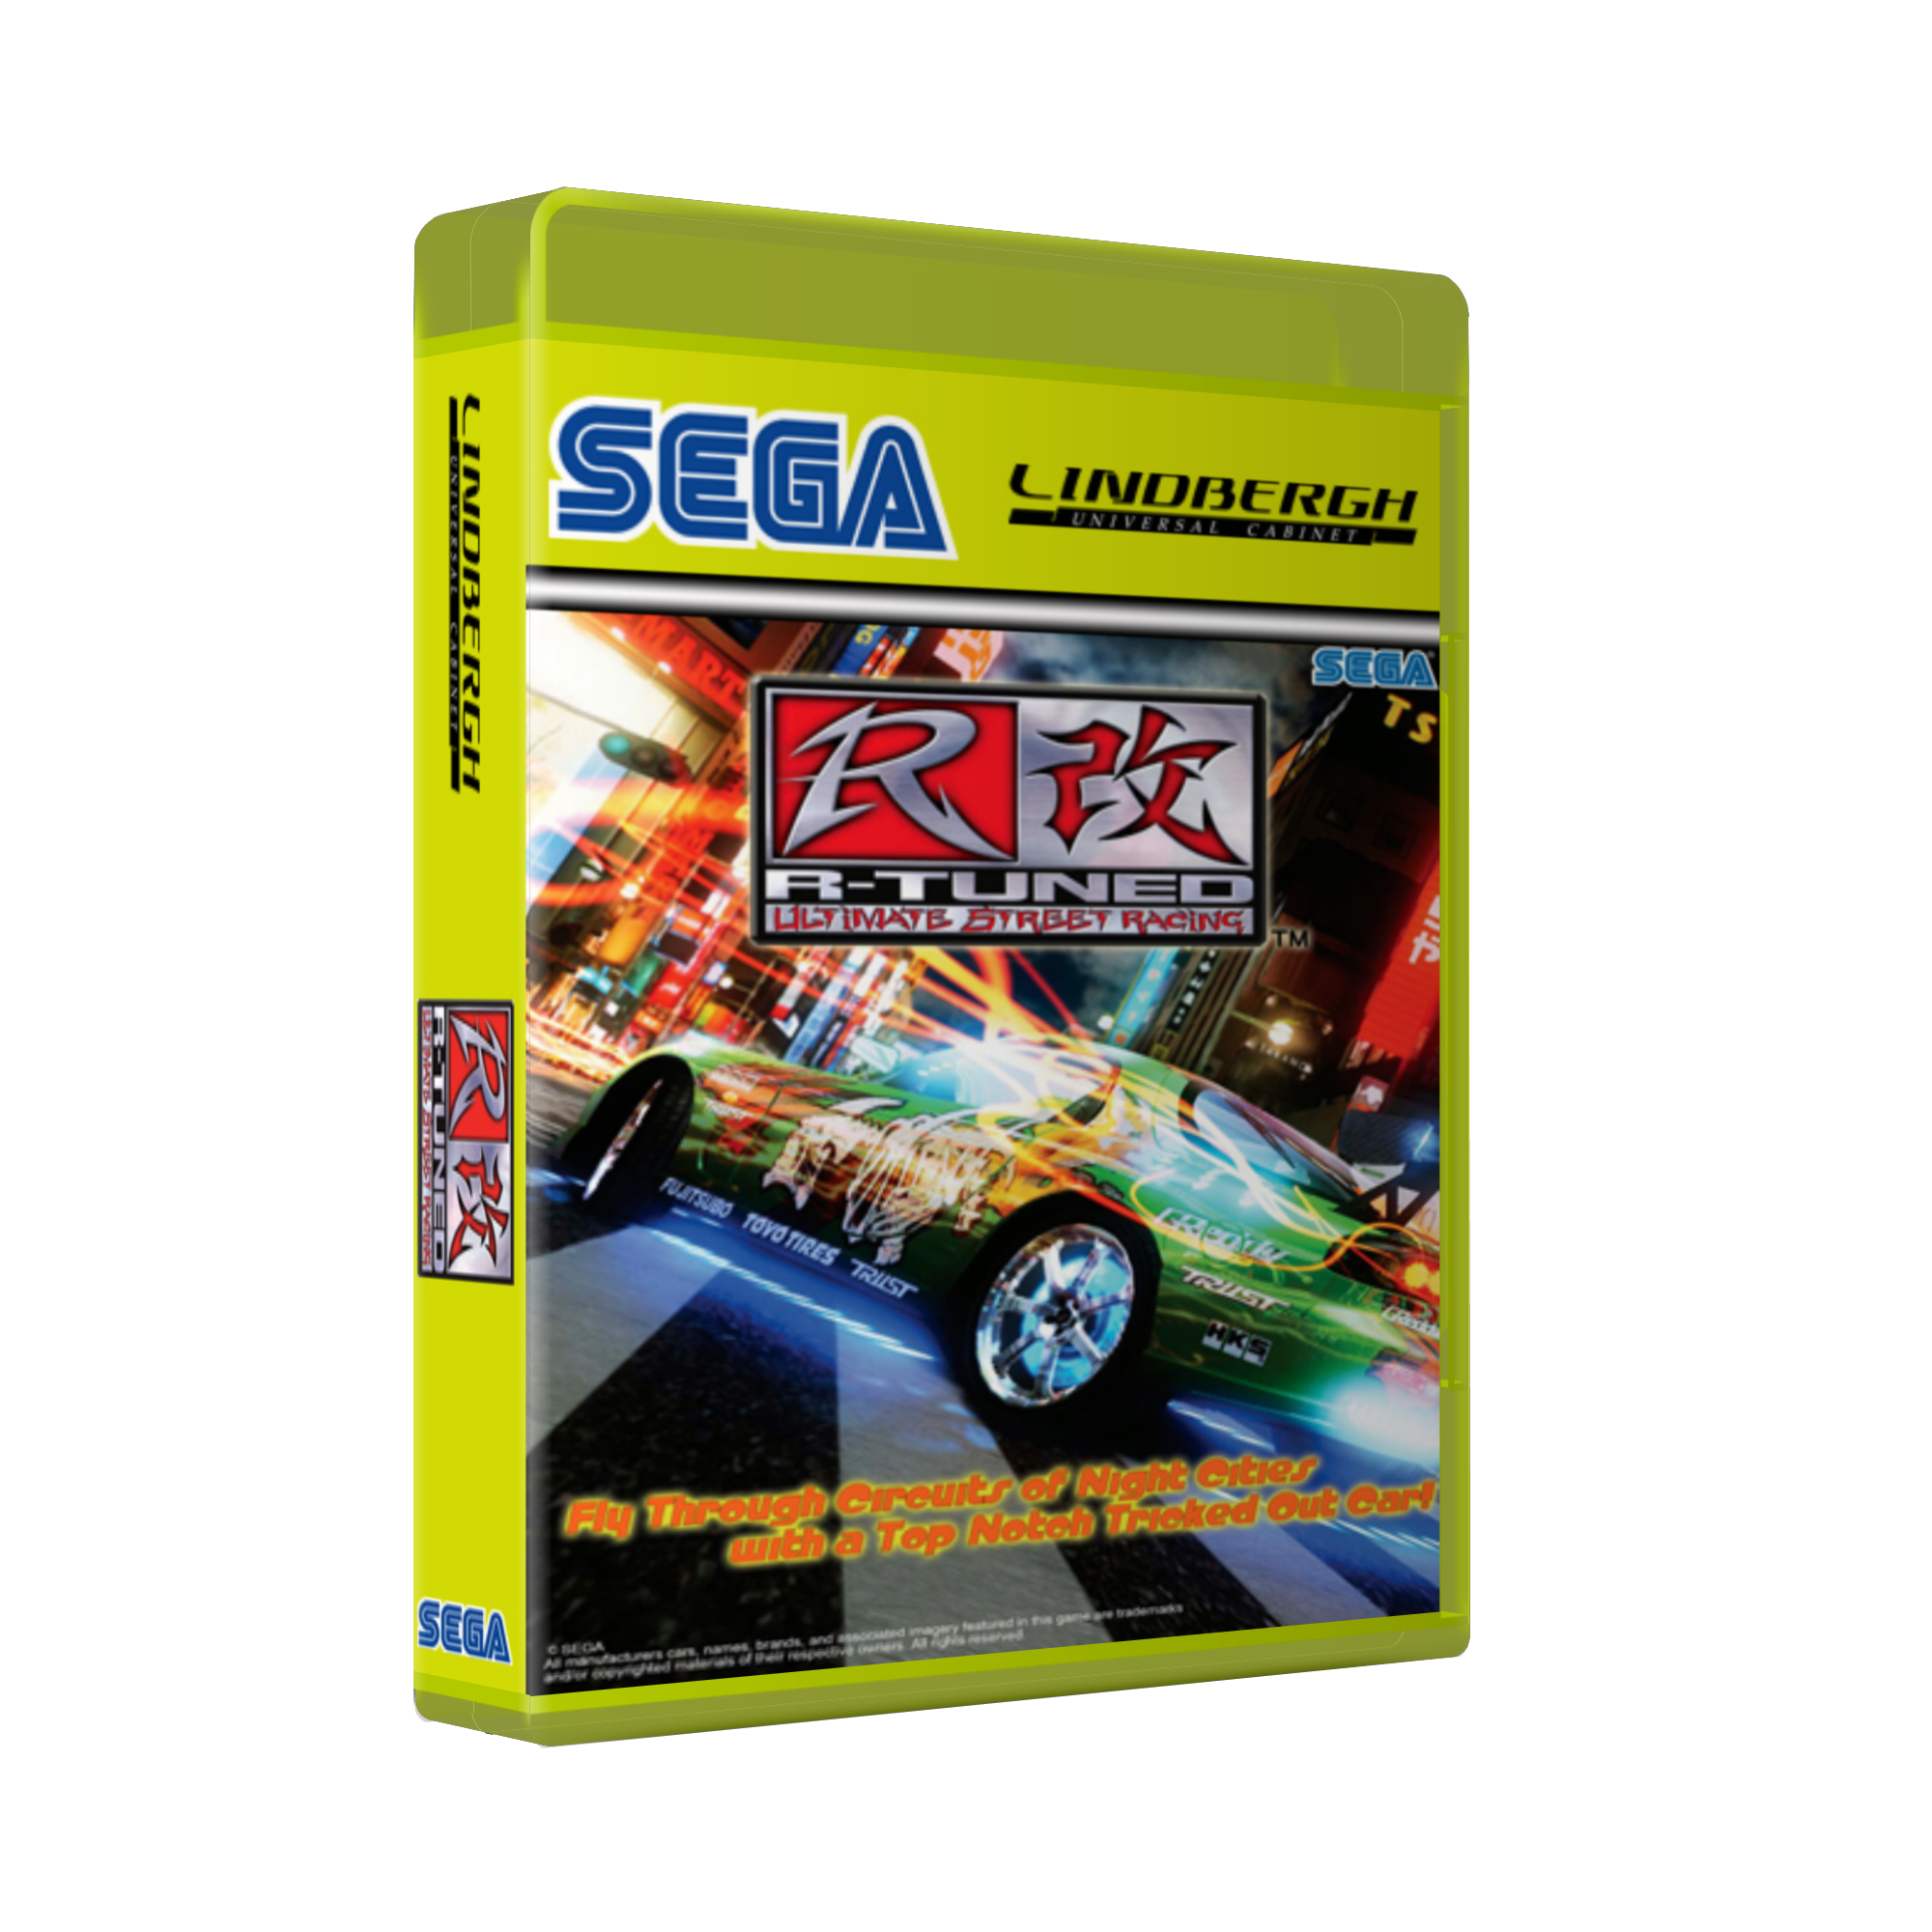 Lost Land Adventure and R-Tuned Ultimate Street Racing - Arcade 